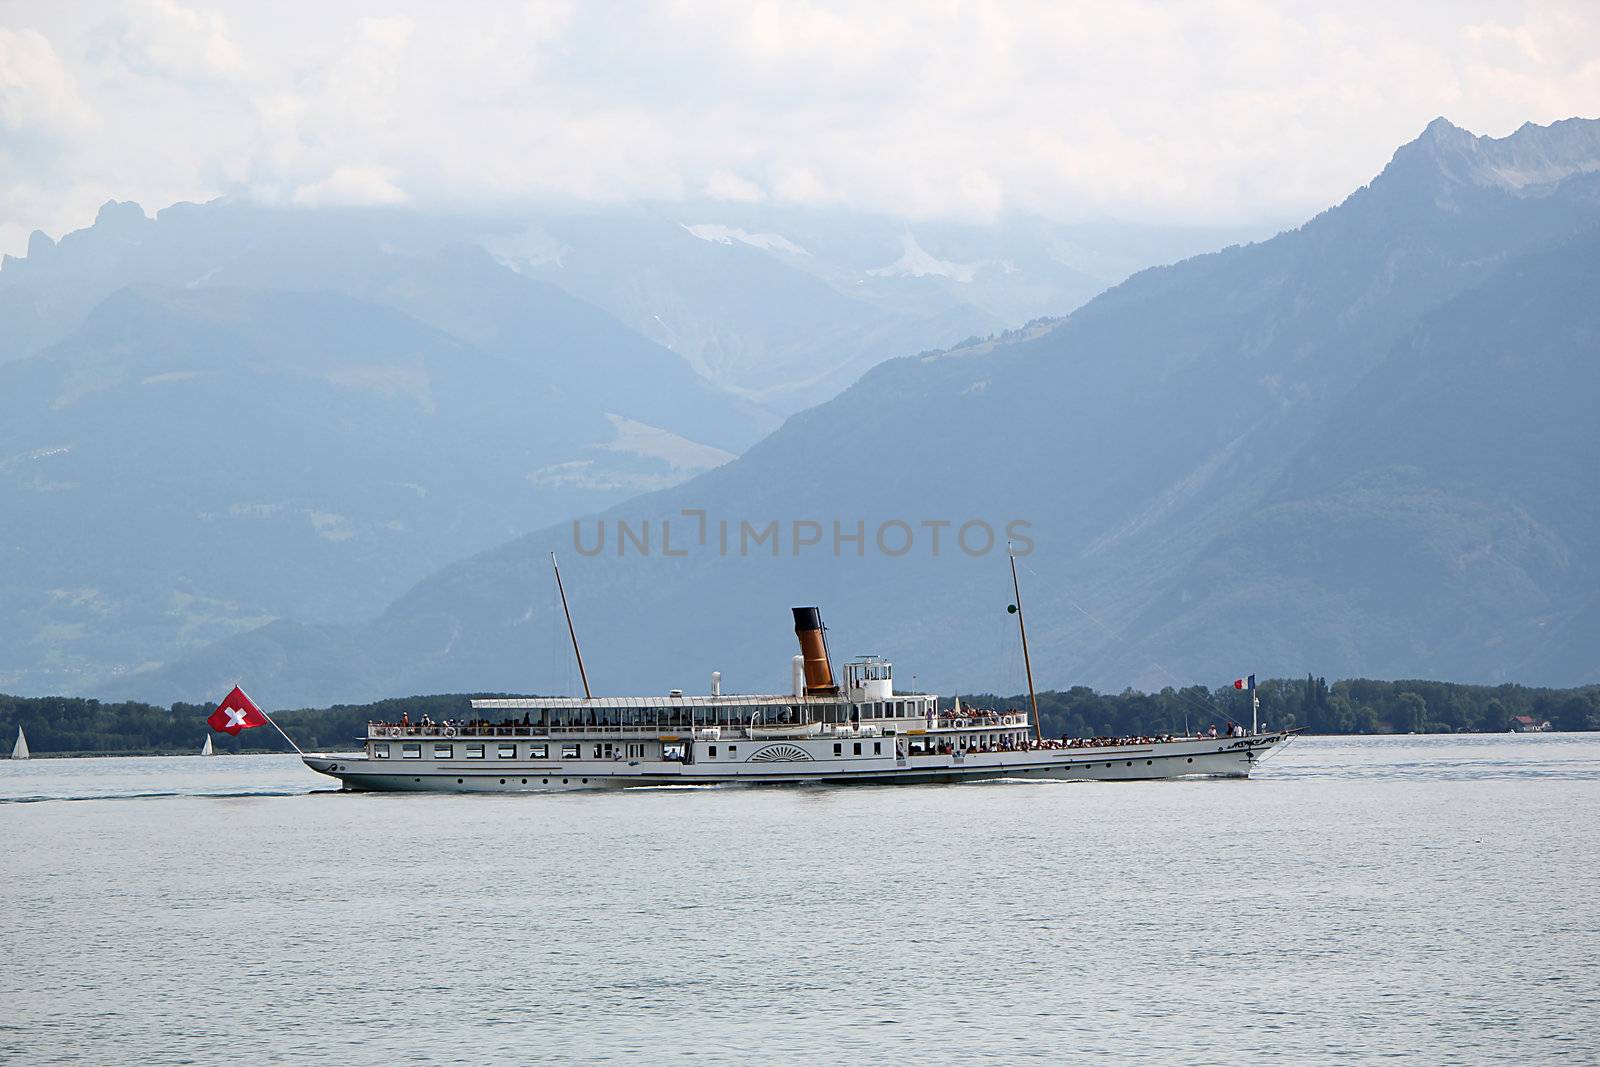 Famous very old steamboat with tourists on the lake of Geneva in front of mountains, Switzerland